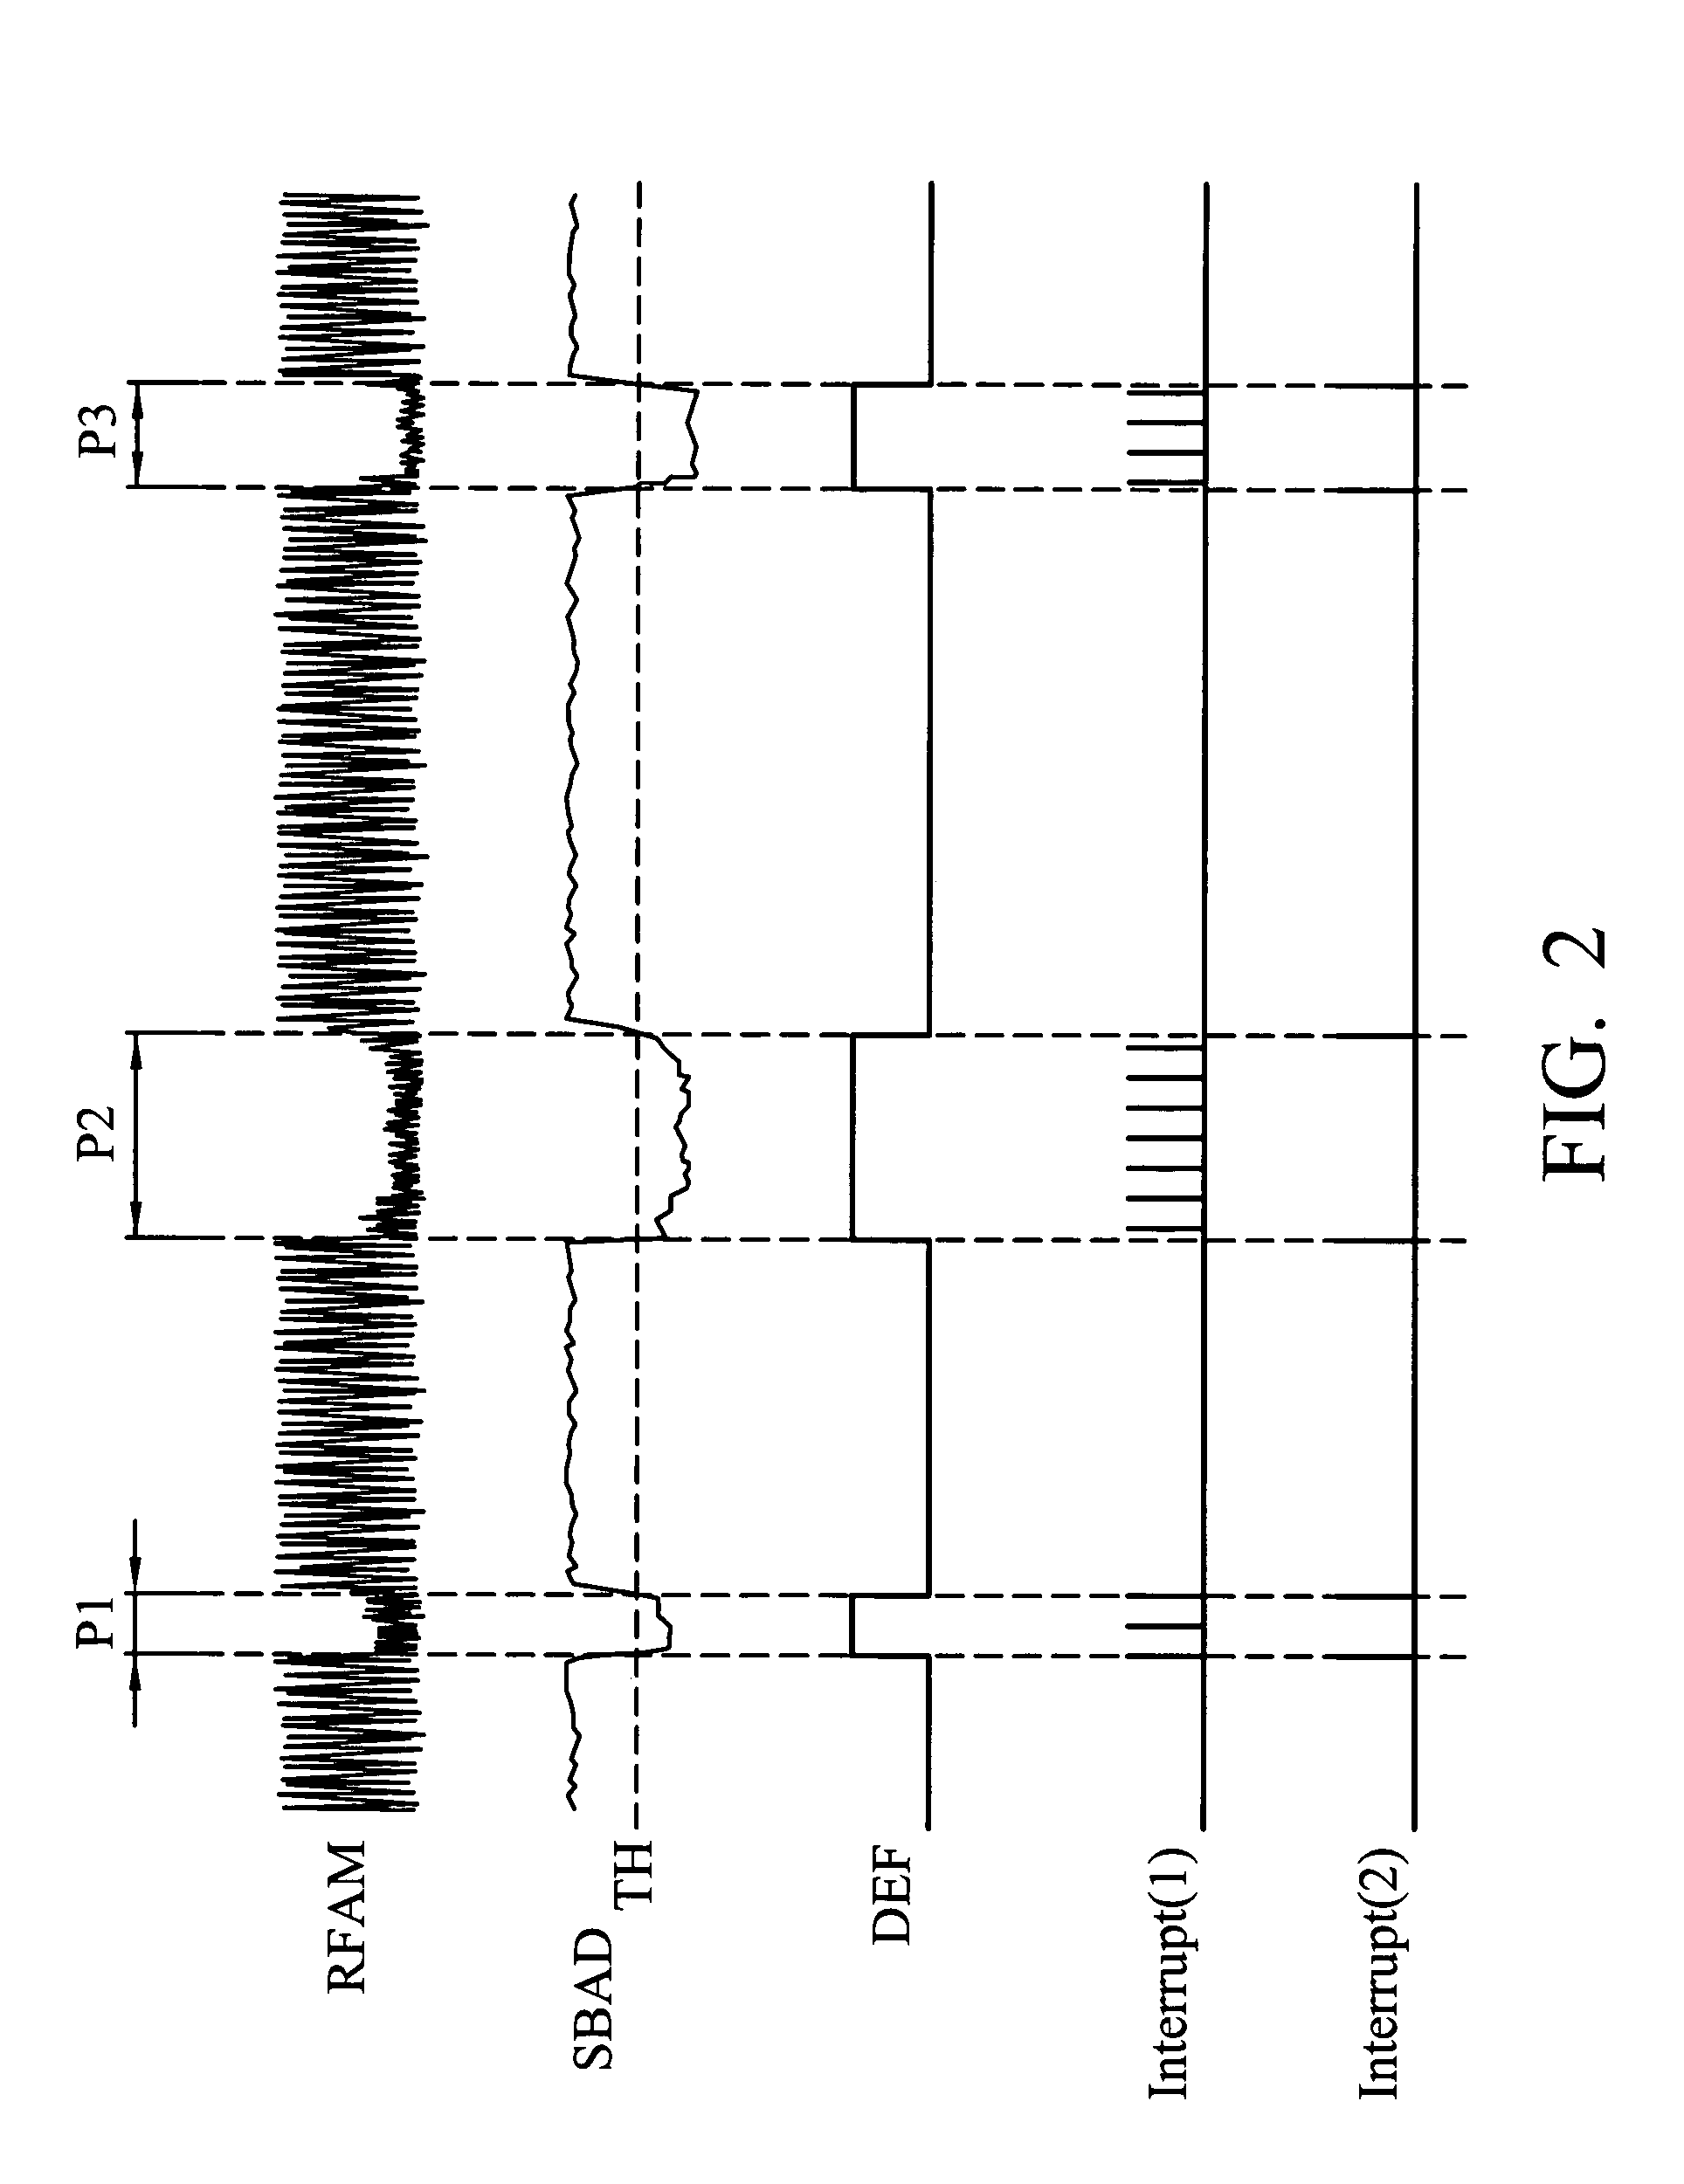 Method and apparatus for retry calculation in an optical disk device